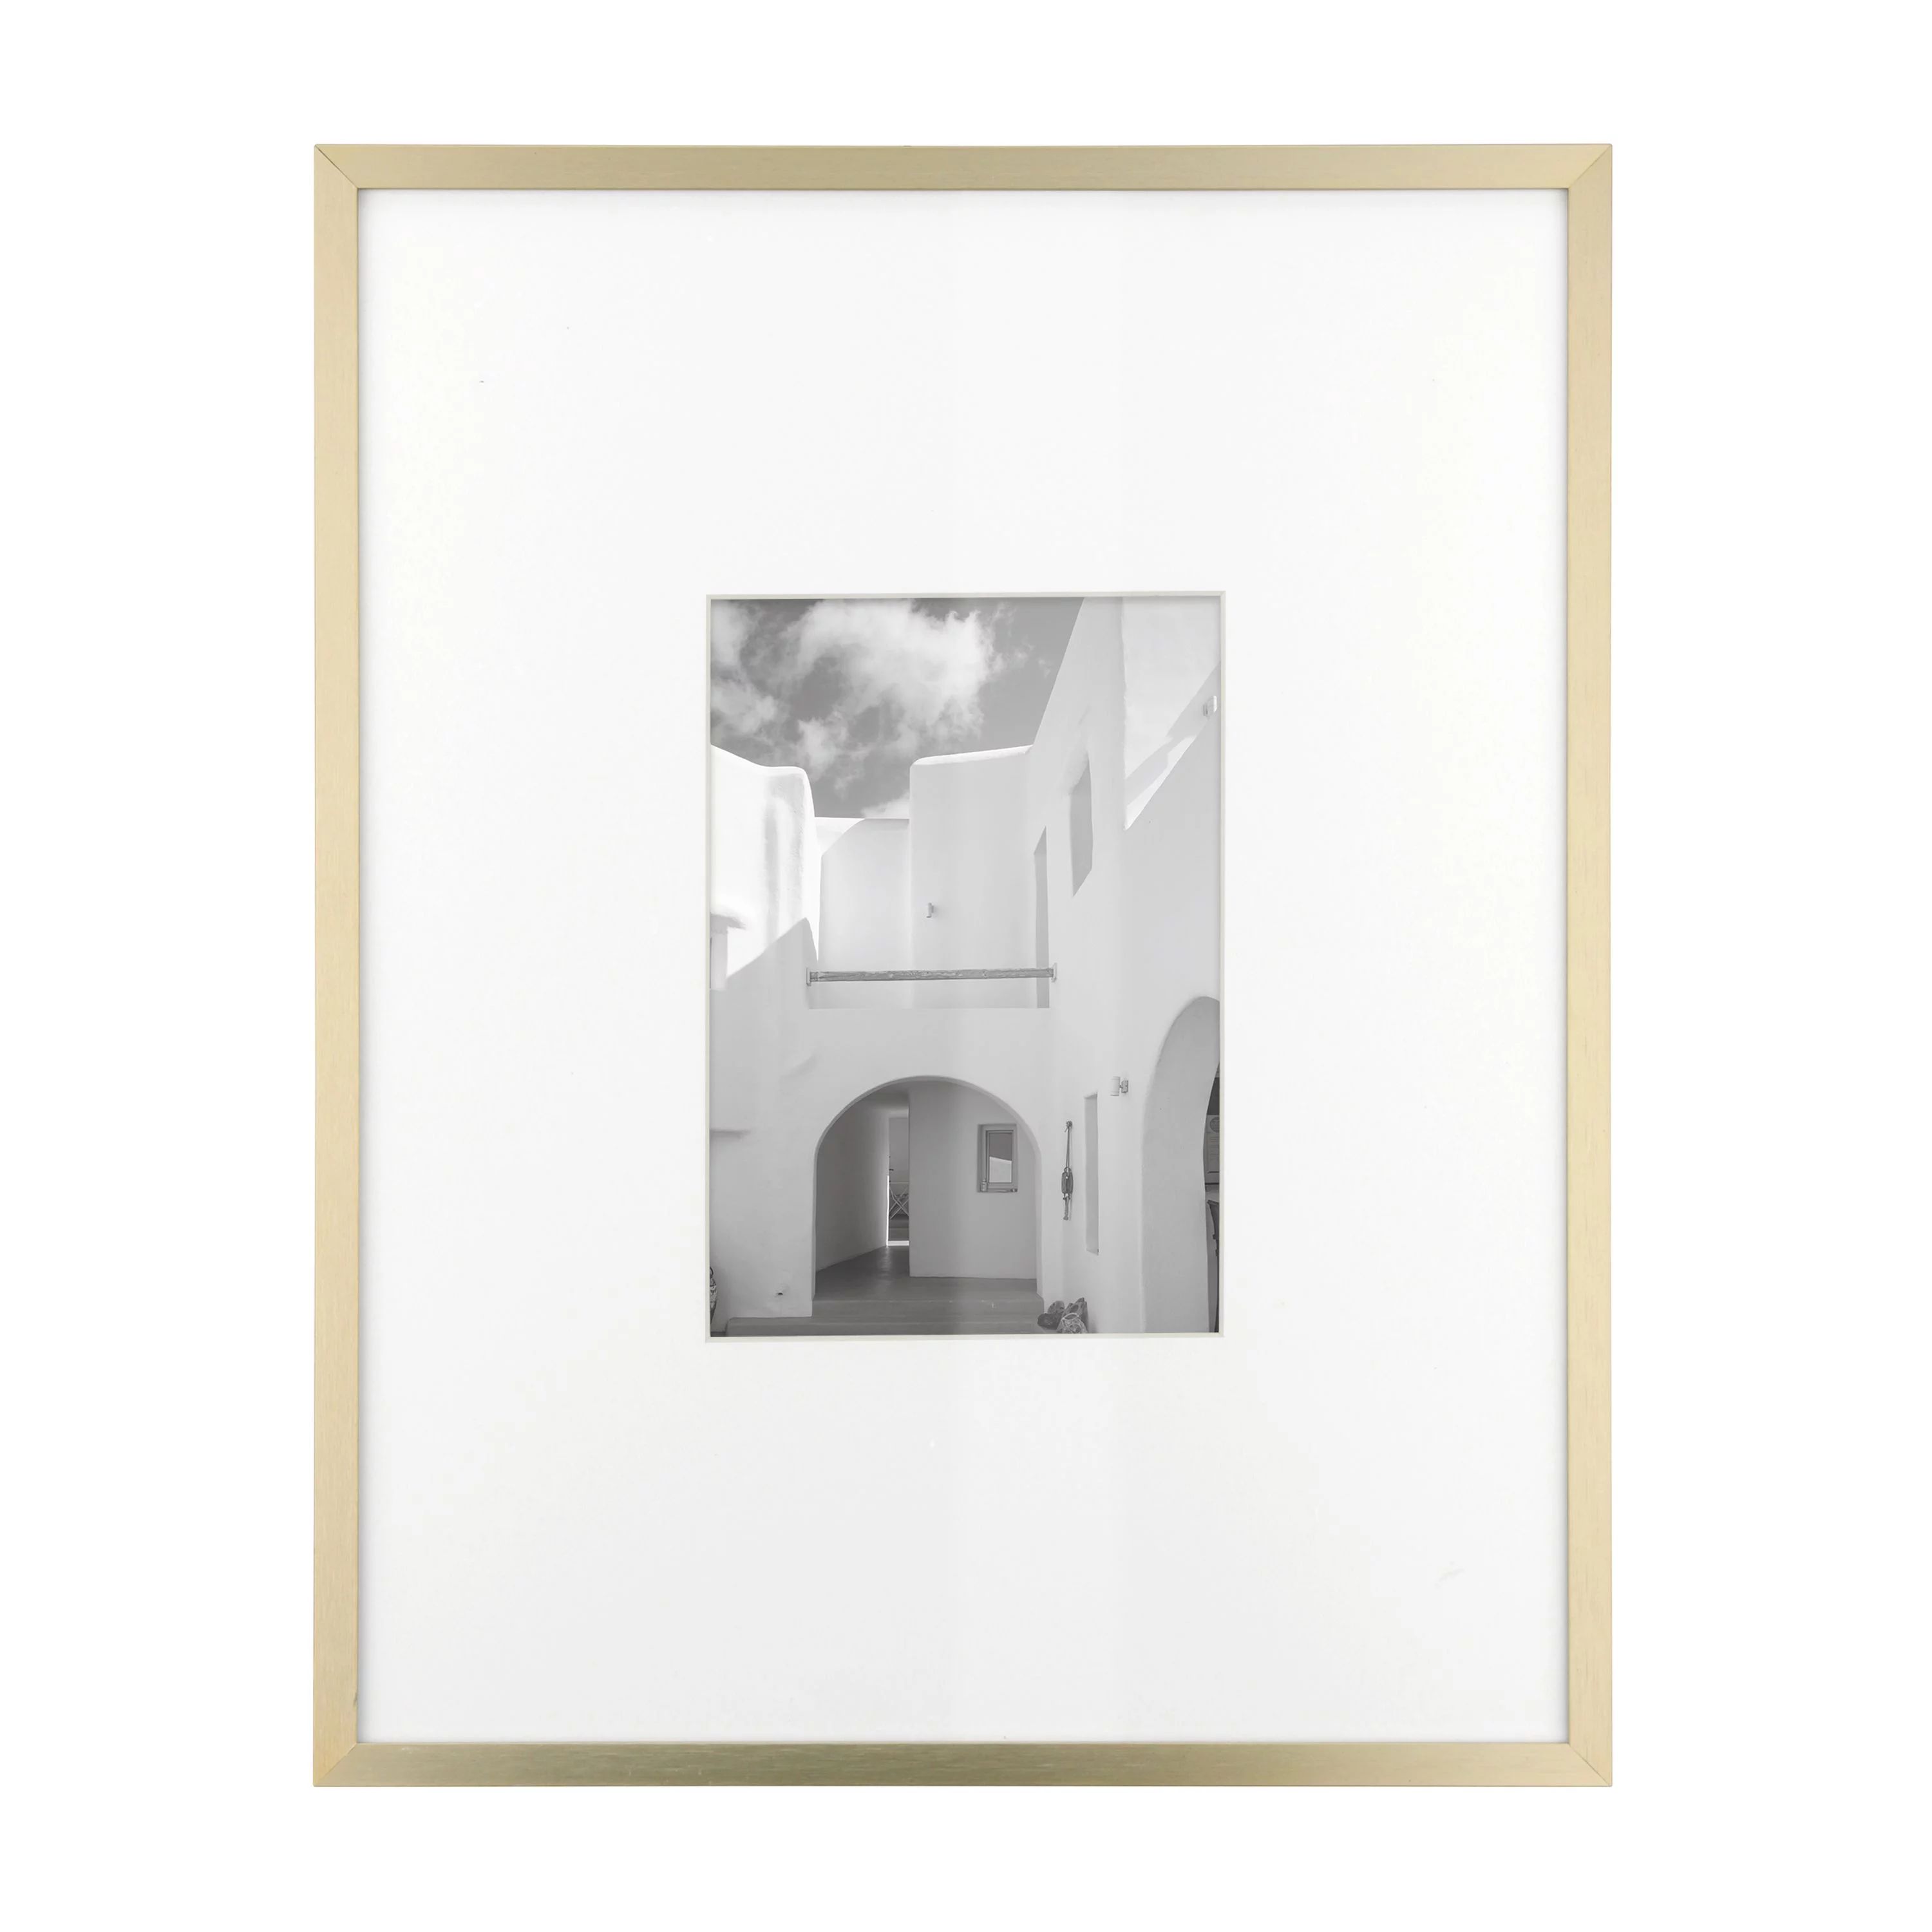 Better Homes & Gardens 11" x 14" Matted to 5" x 7" Metal Wall Picture Frame, Gold | Walmart (US)